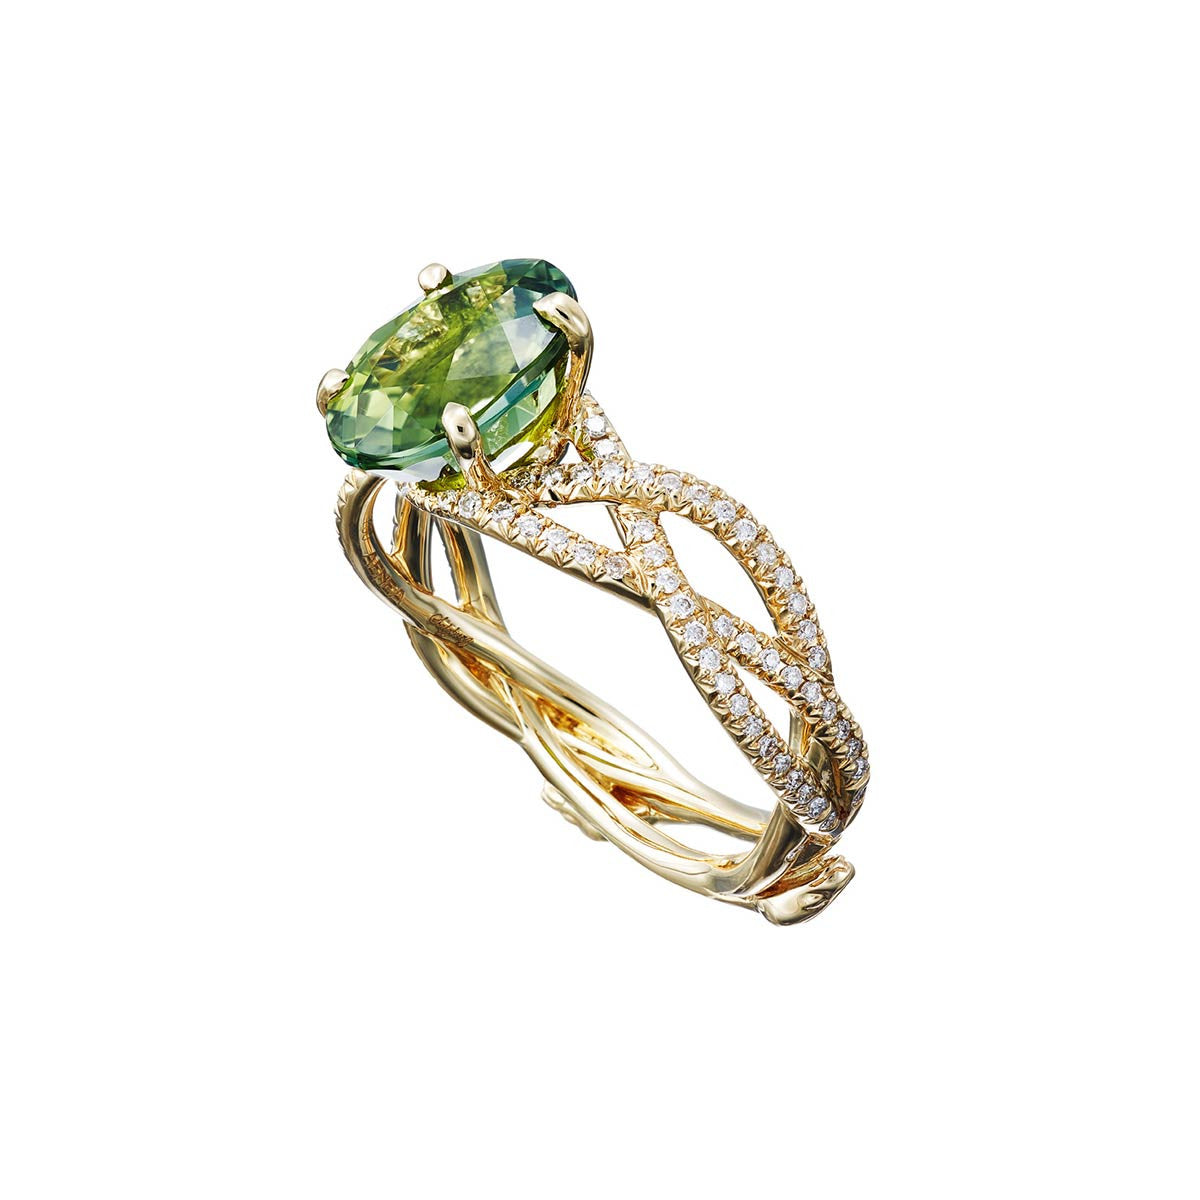 Ring "3 Snakes" Yellow Gold with White Diamonds and a Green Tourmaline 4,25ct.